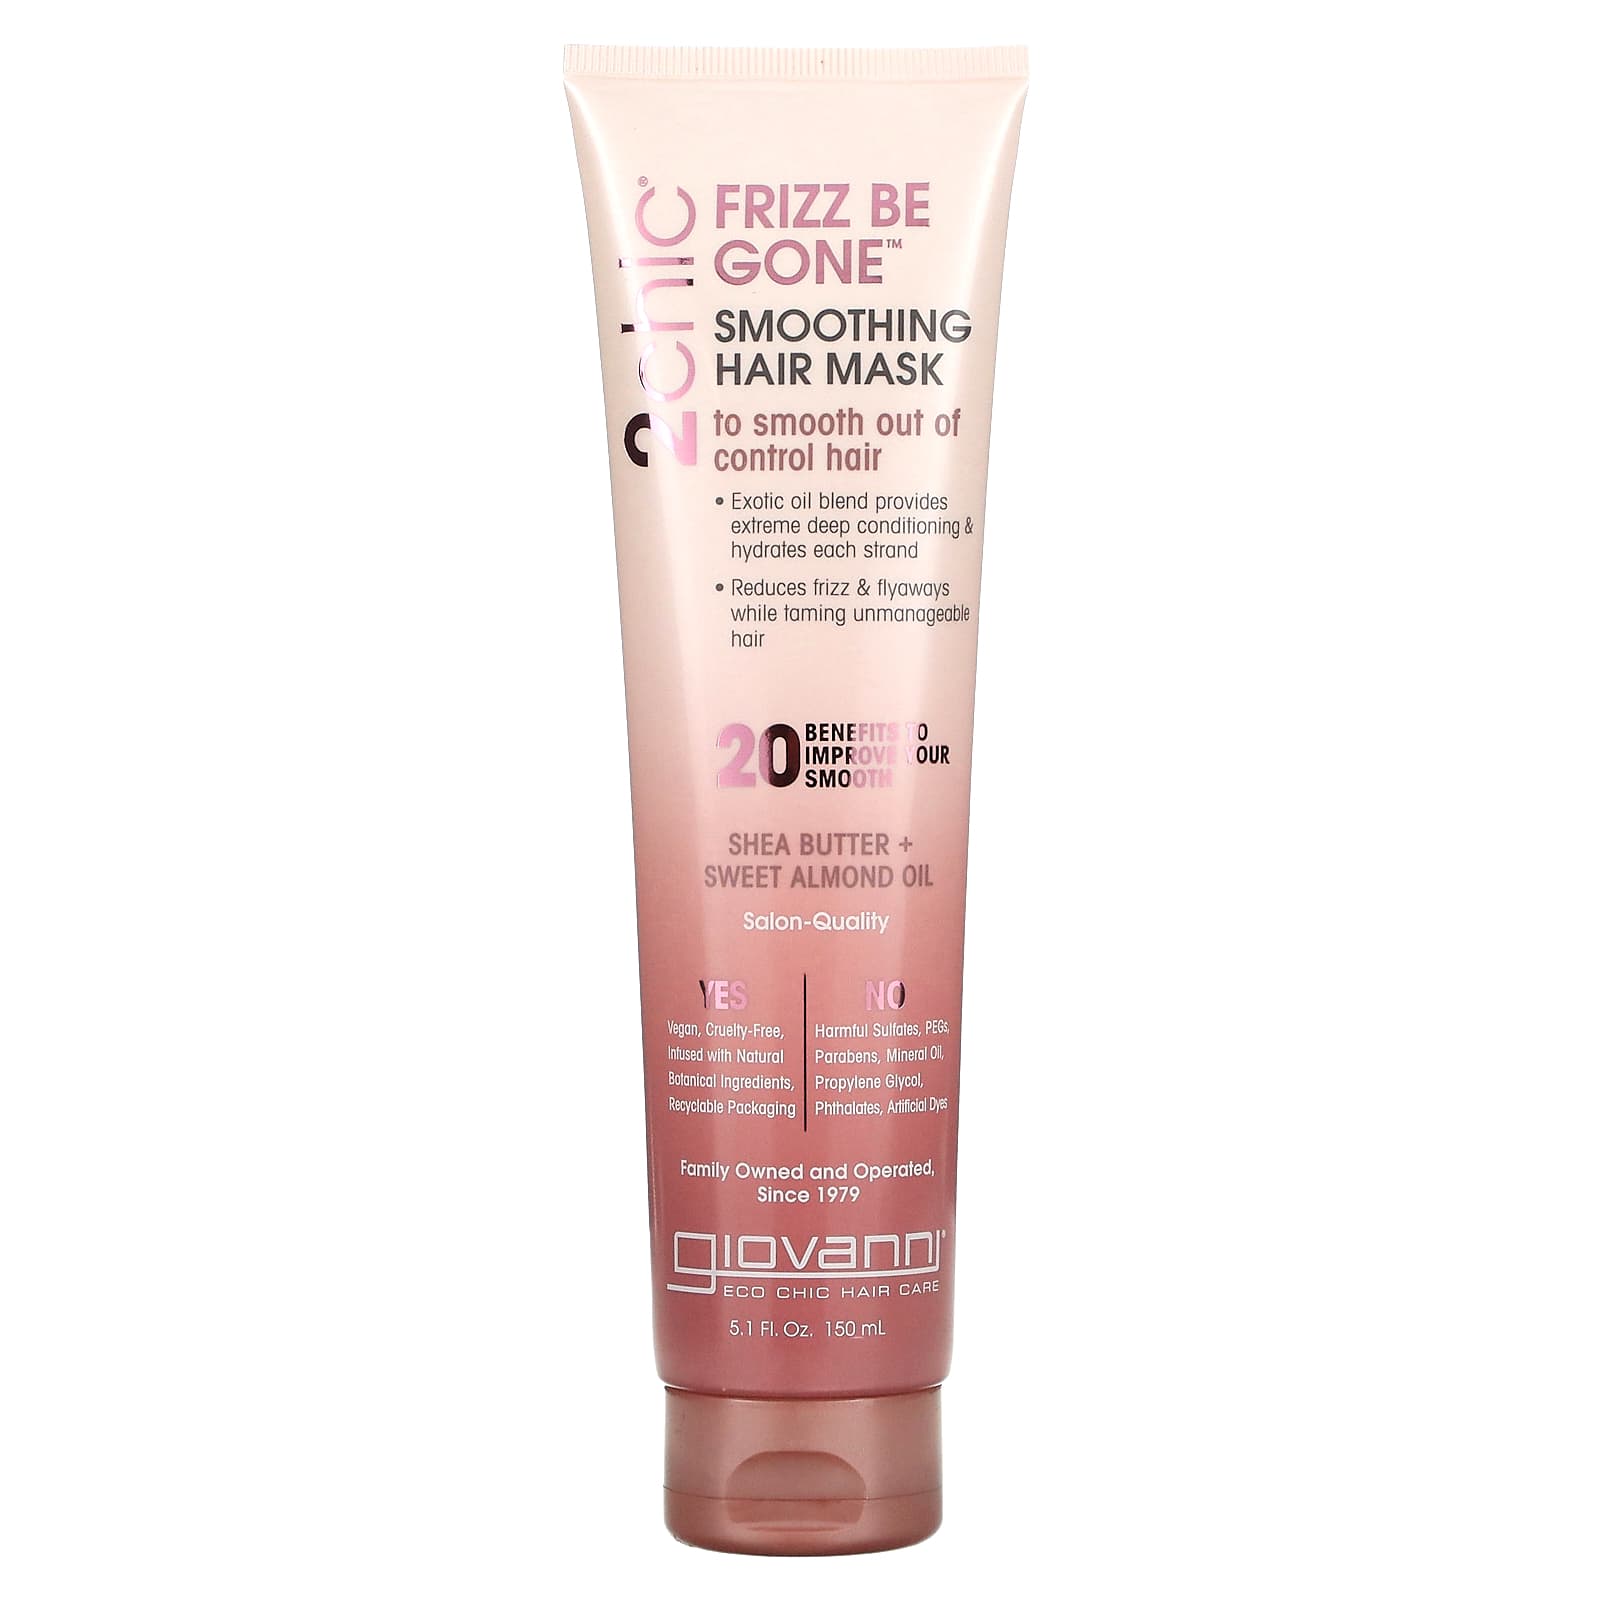 Overskyet krybdyr spand Giovanni, 2chic, Frizz Be Gone Smoothing Hair Mask, Shea Butter + Sweet Almond  Oil, 5.1 fl oz (150 ml)